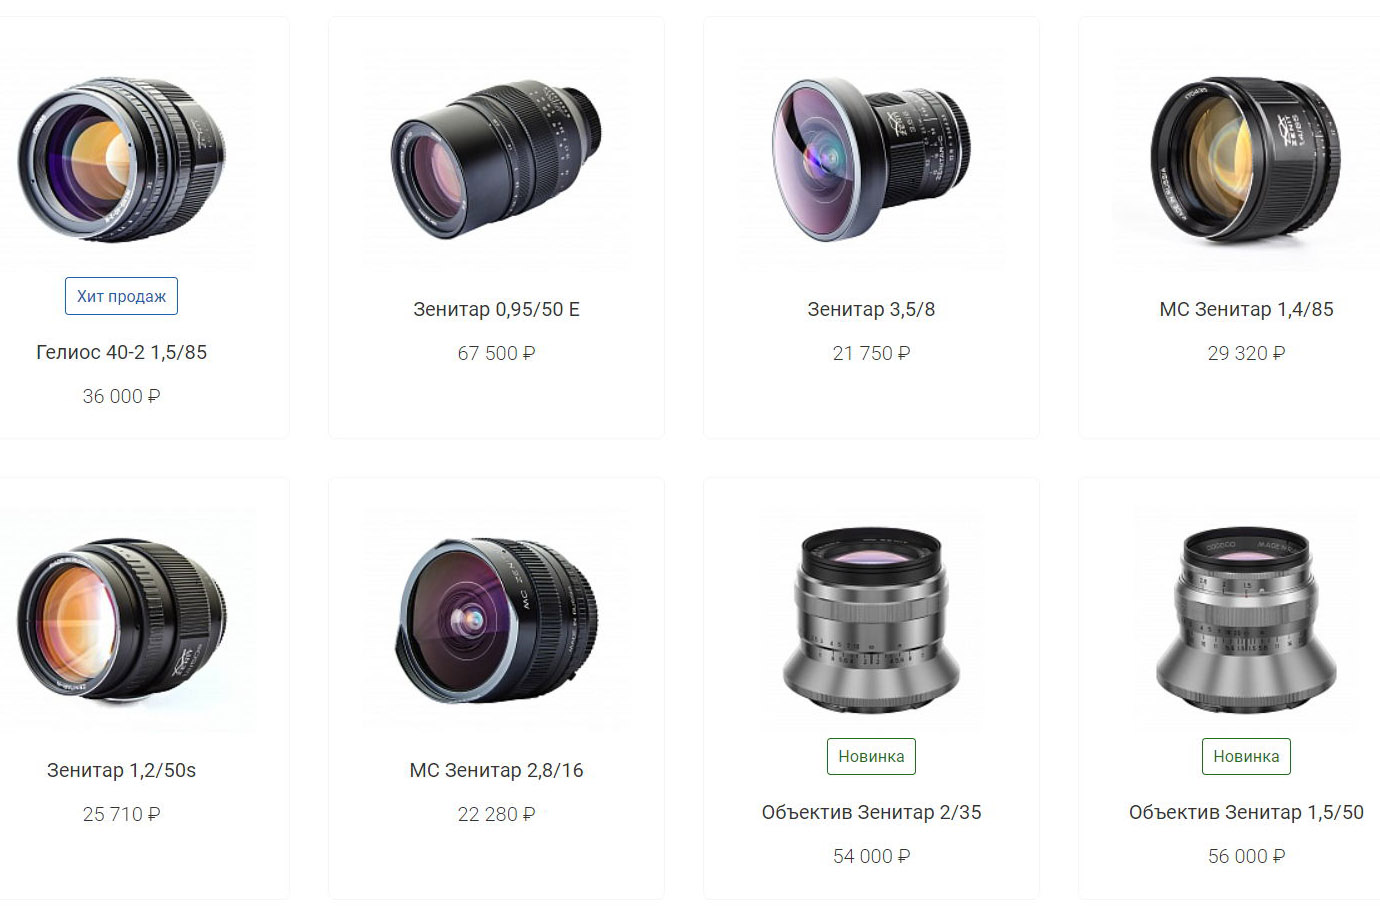 The prices for optics in the official zenit.photo store have already been seen by everyone who is interested, and you can discuss it here